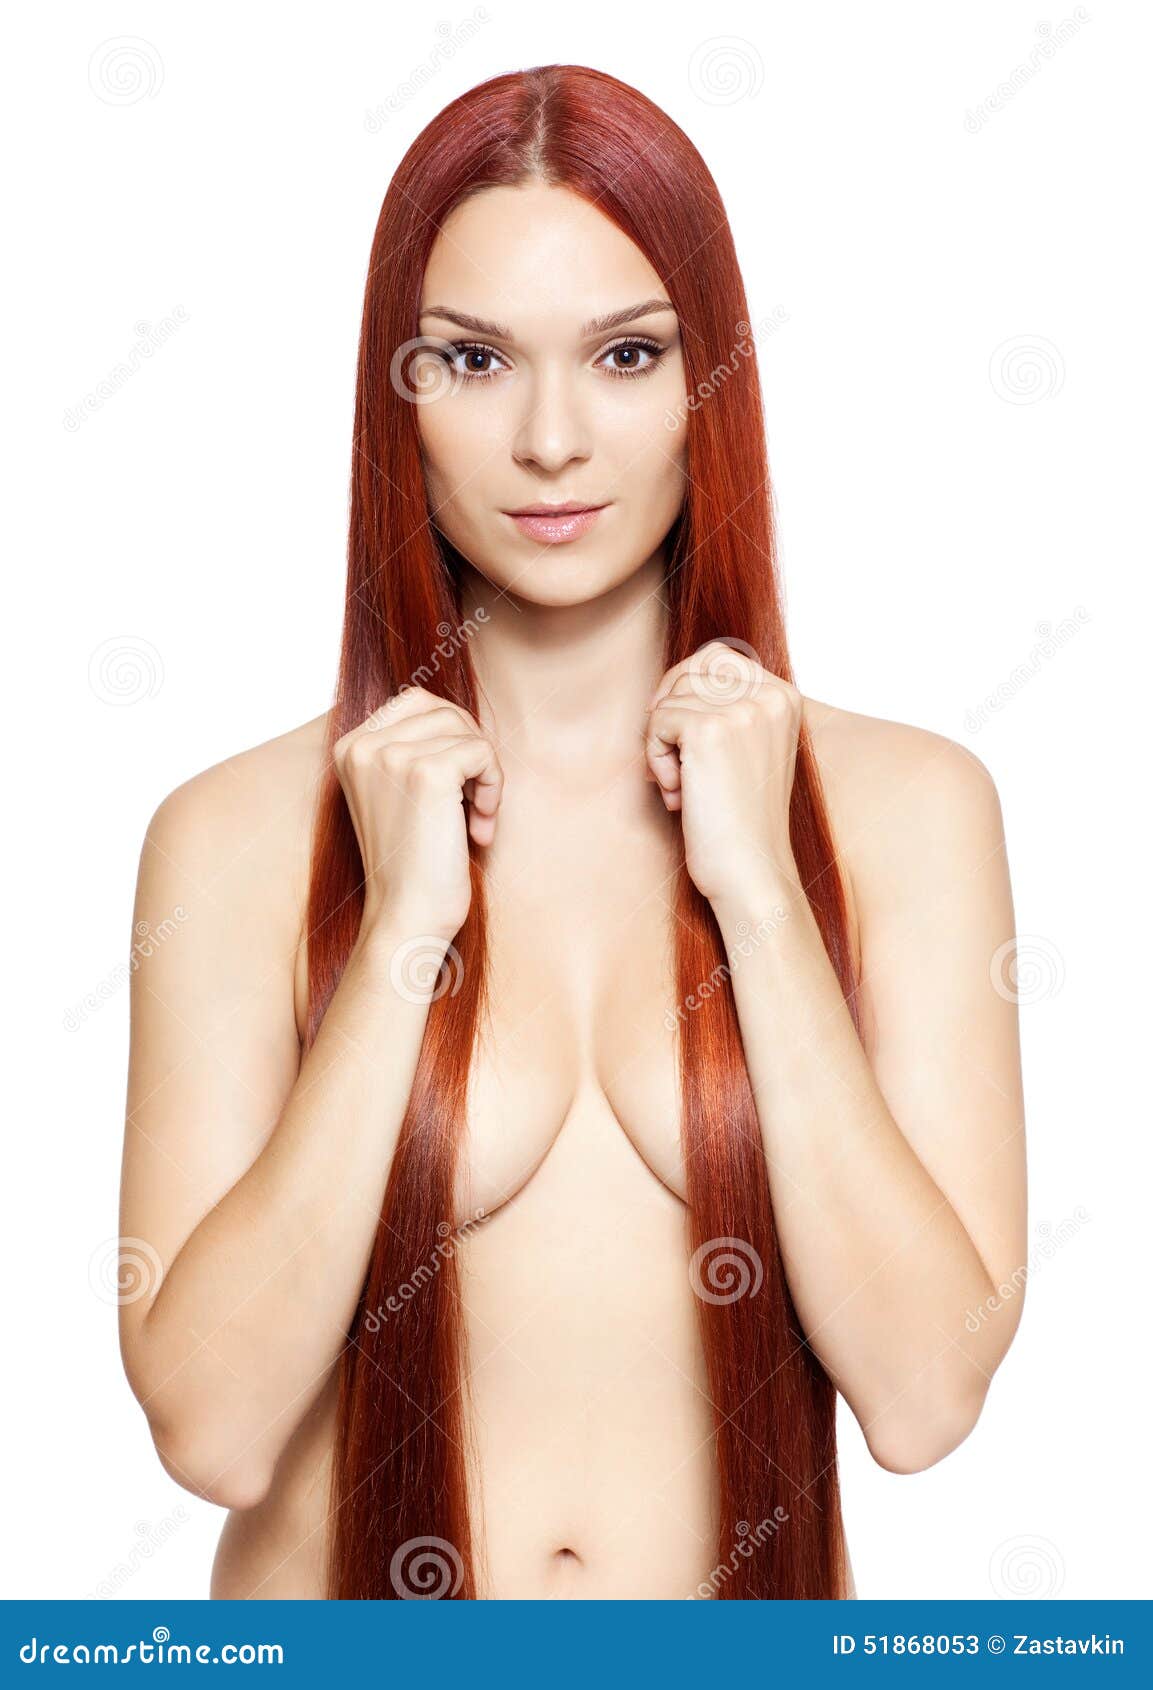 Red hair naked woman